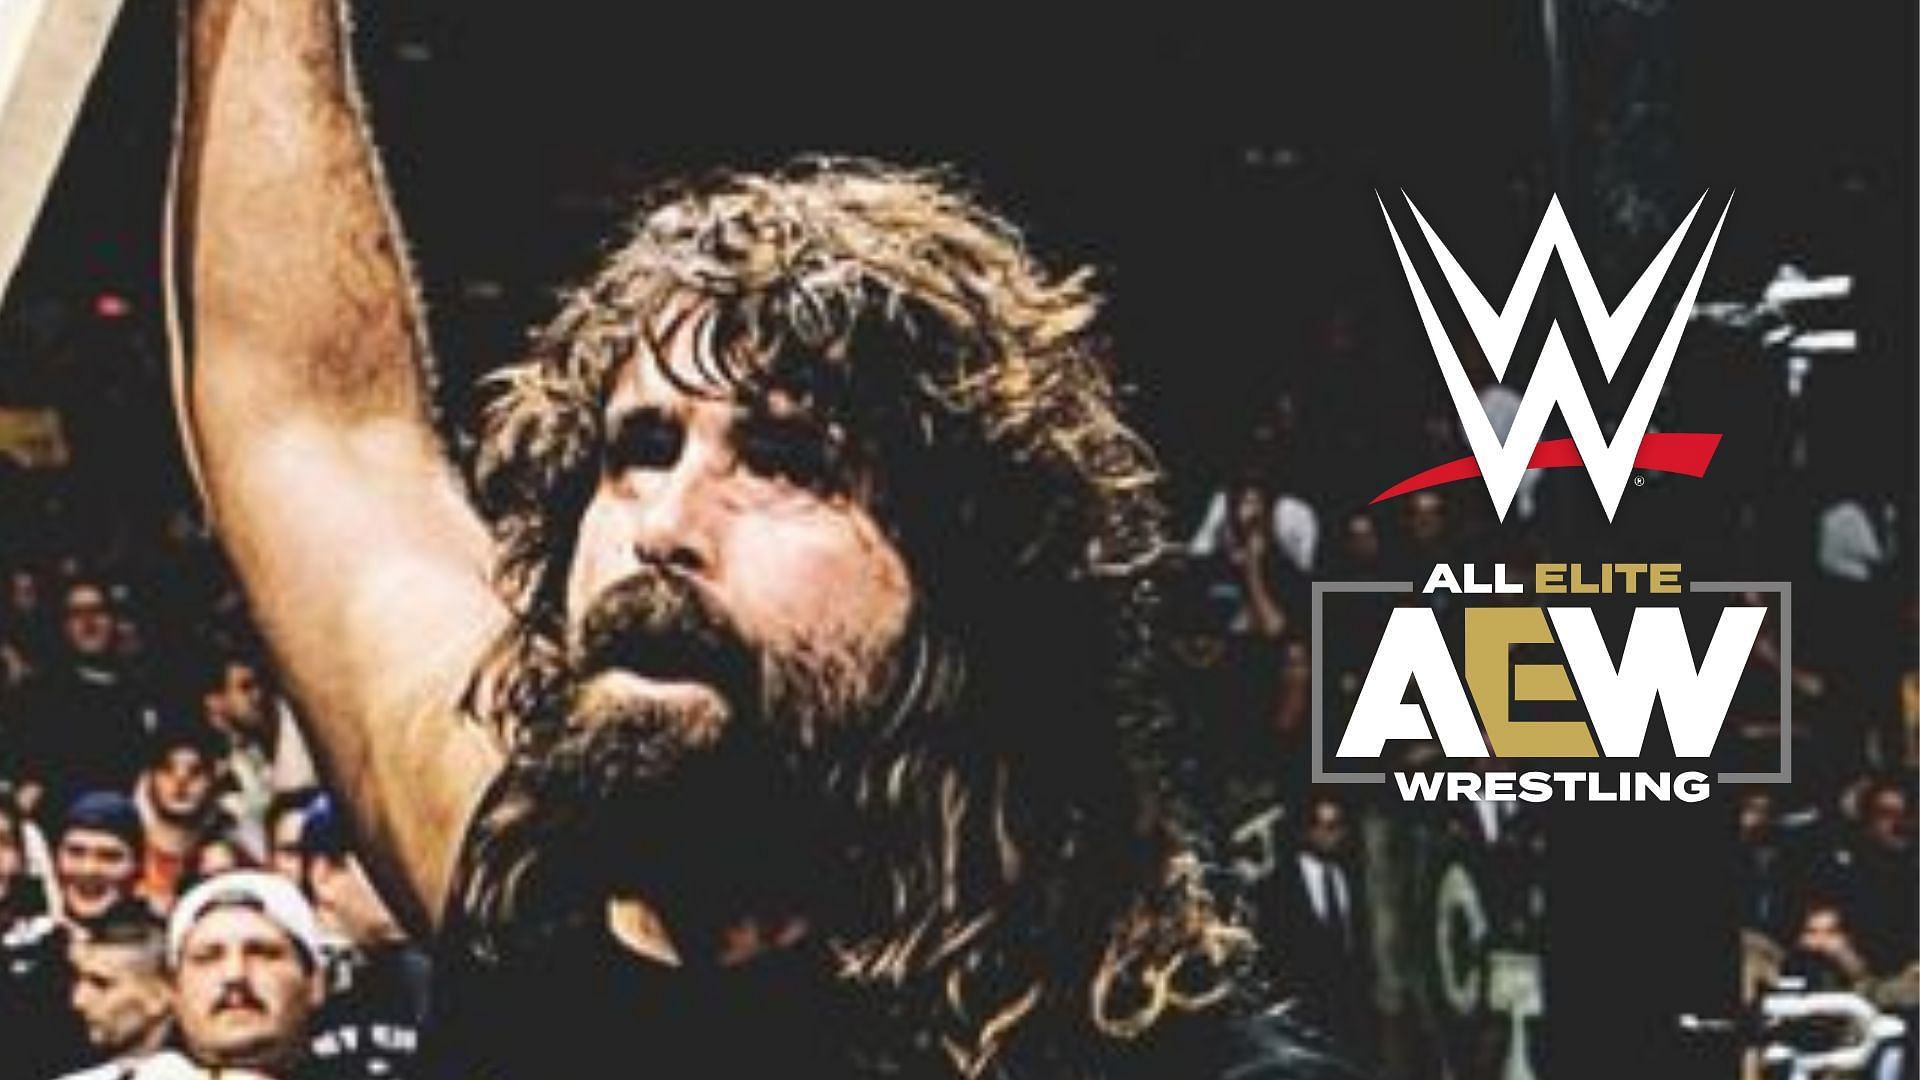 Mick Foley feels as if matches against these stars would be great!